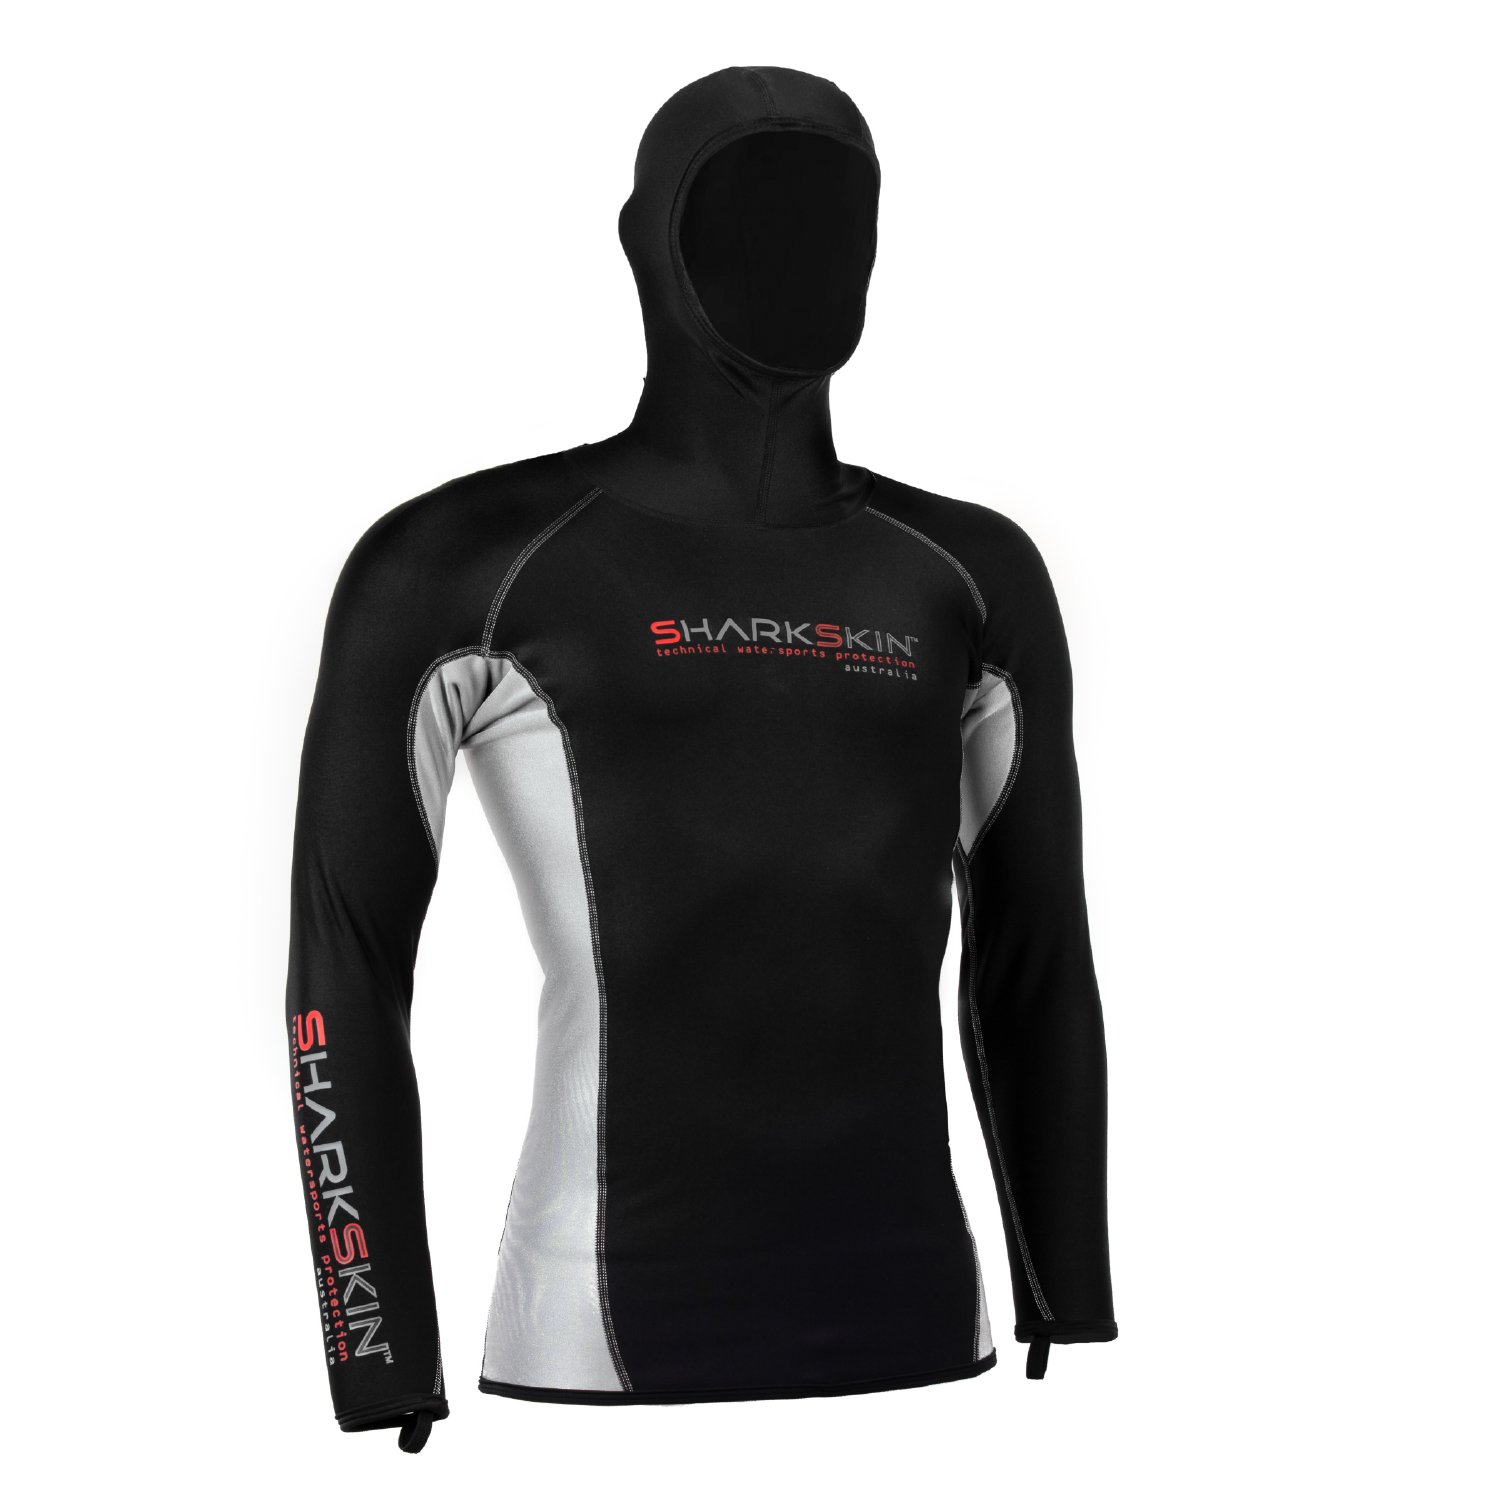 Sharkskin Chillproof Long Sleeve with Hood - Mens